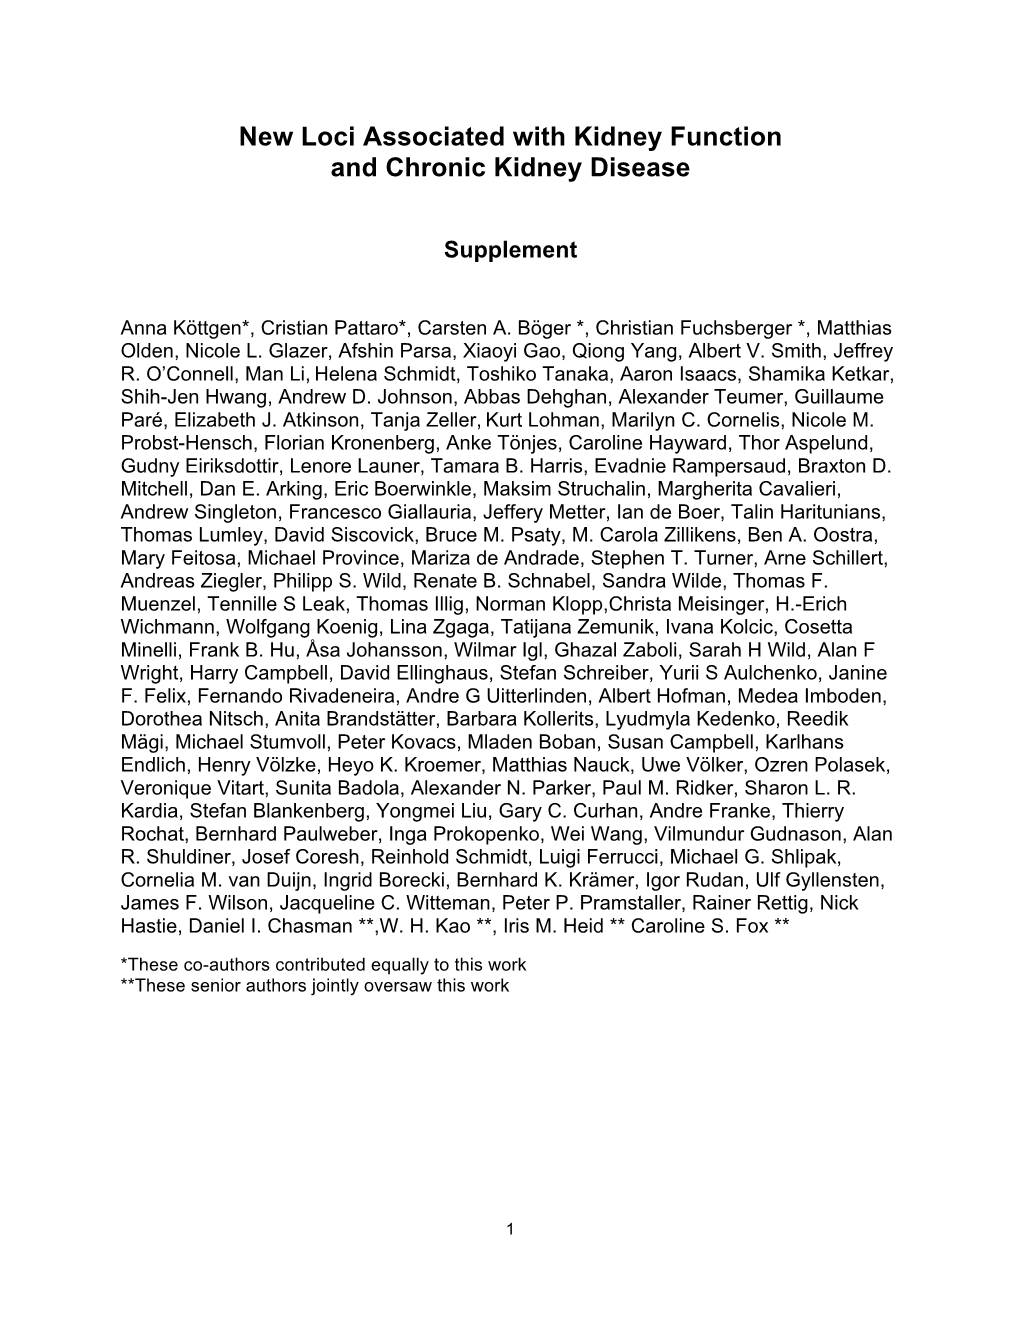 New Loci Associated with Kidney Function and Chronic Kidney Disease